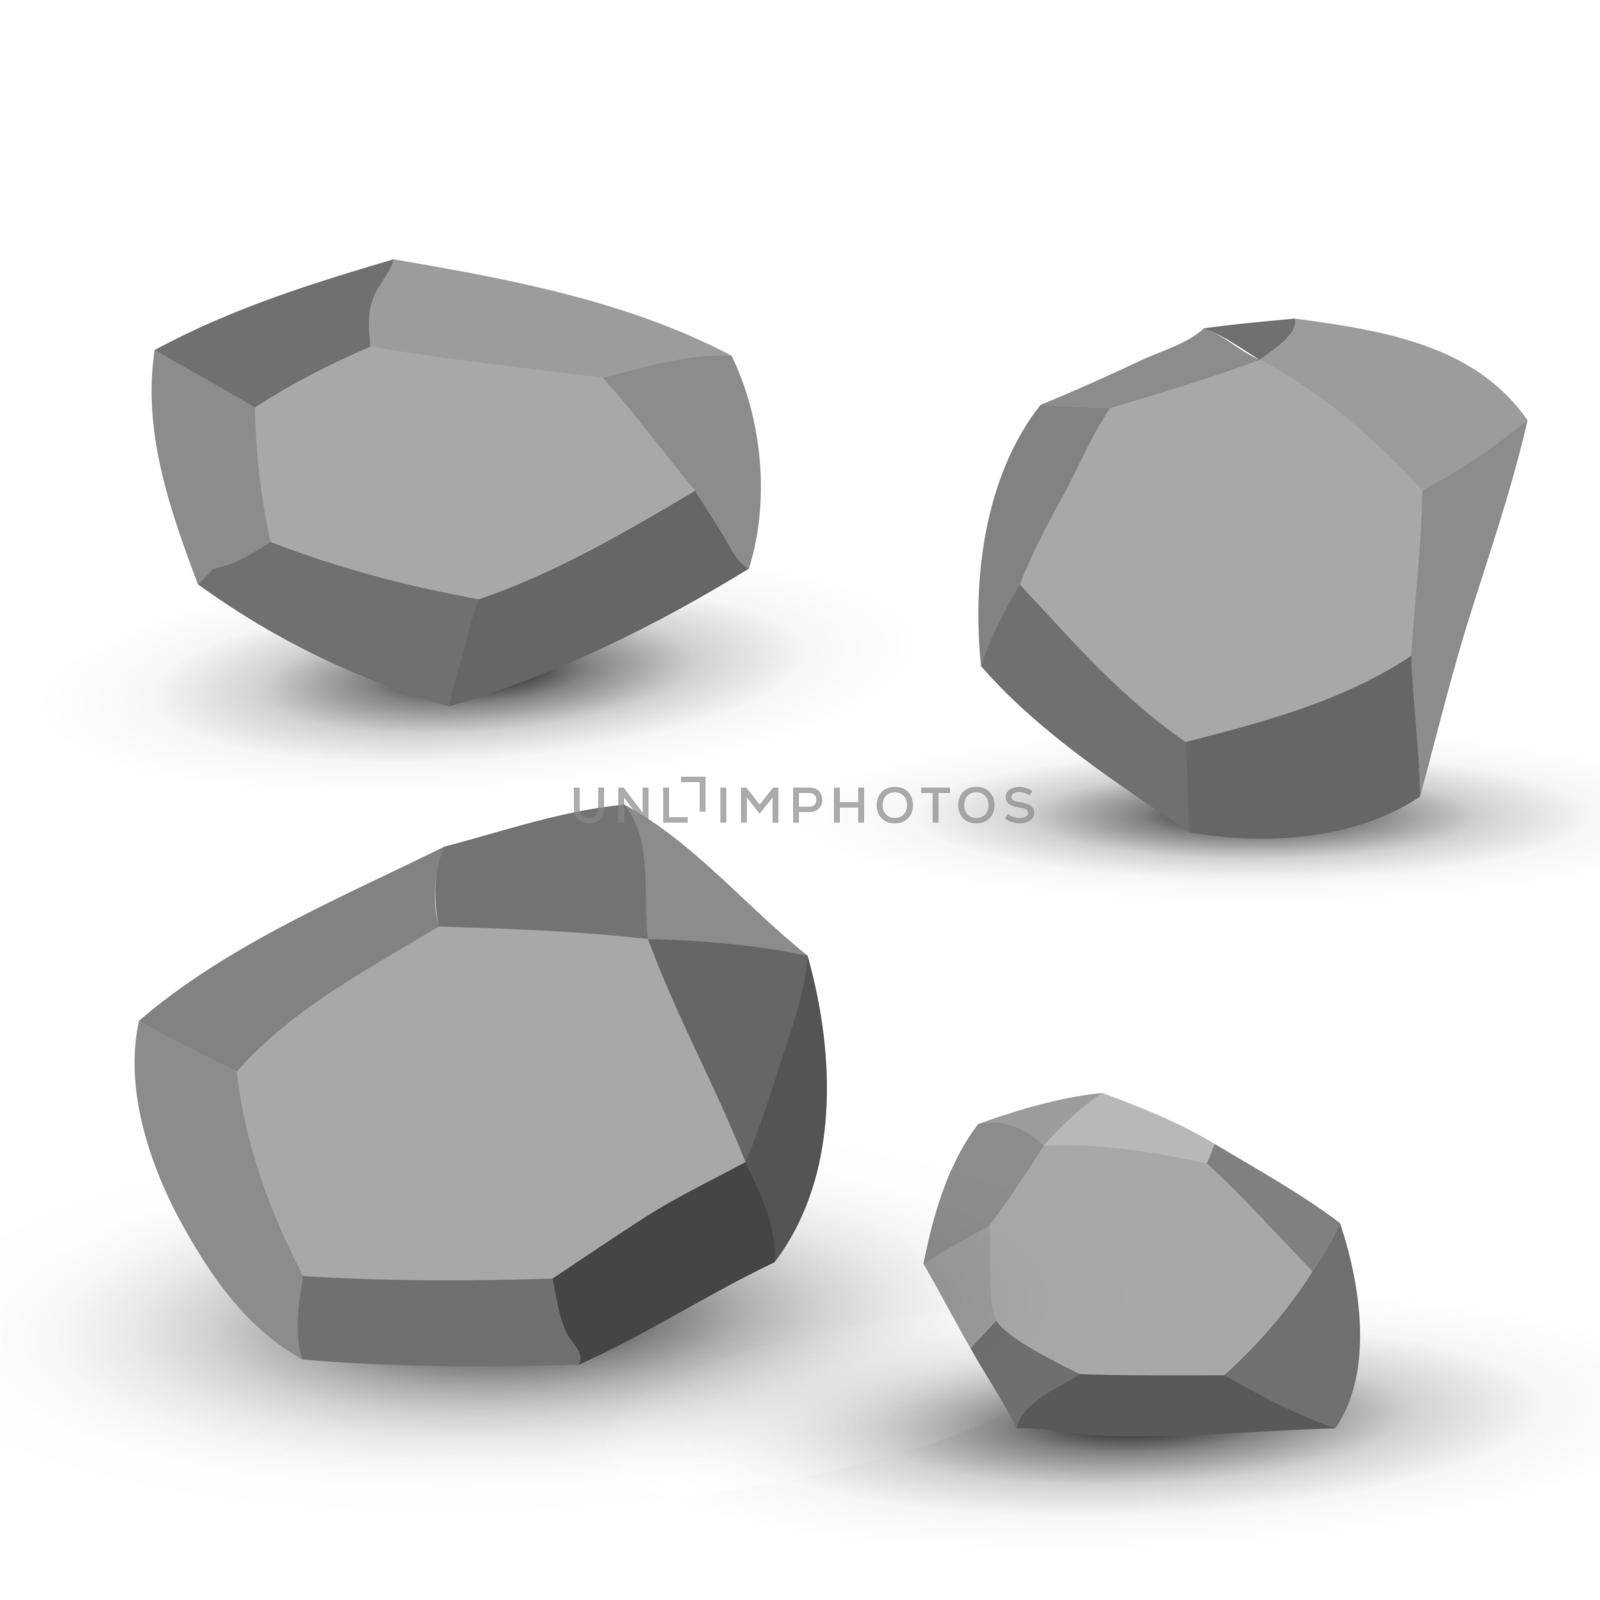 Cartoon stones. Rock stone isometric set. Granite grey boulders, natural building block shapes, wall stones. 3d flat isolated illustration. Vector collection by allaku